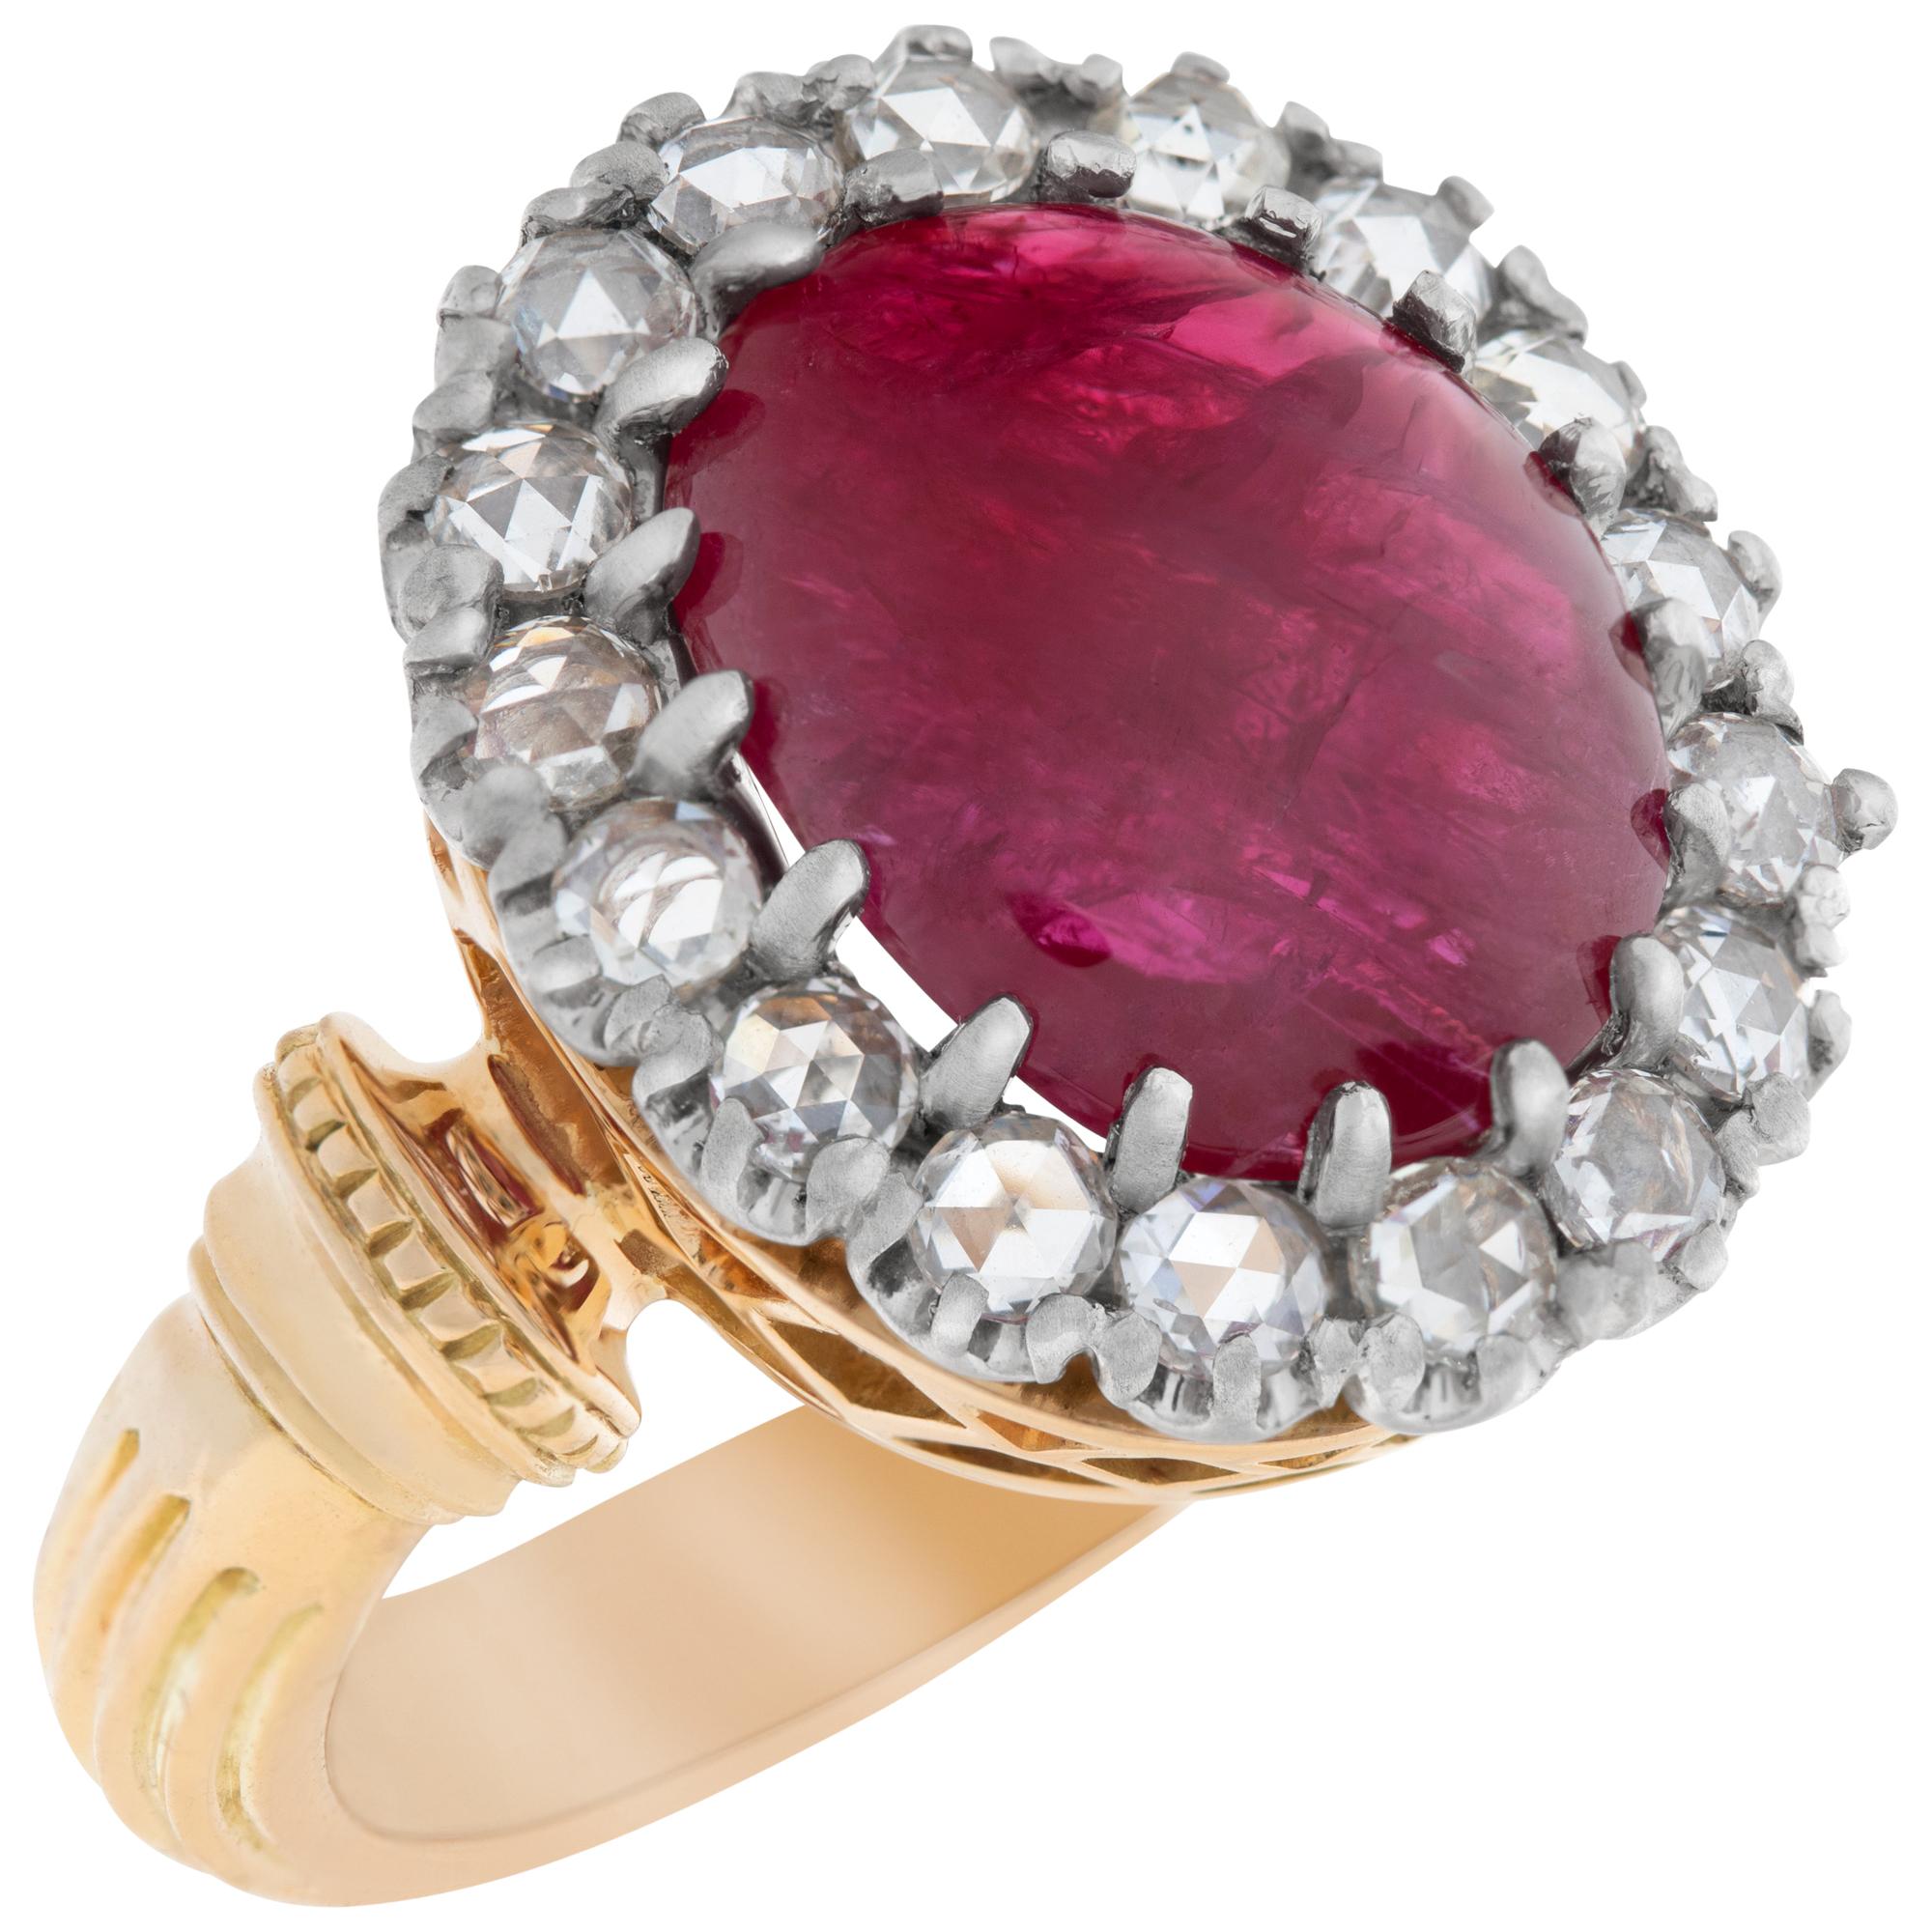 Rose Cut Cabochon Burma Ruby with Diamond Halo Ring Set in 18k Yellow Gold